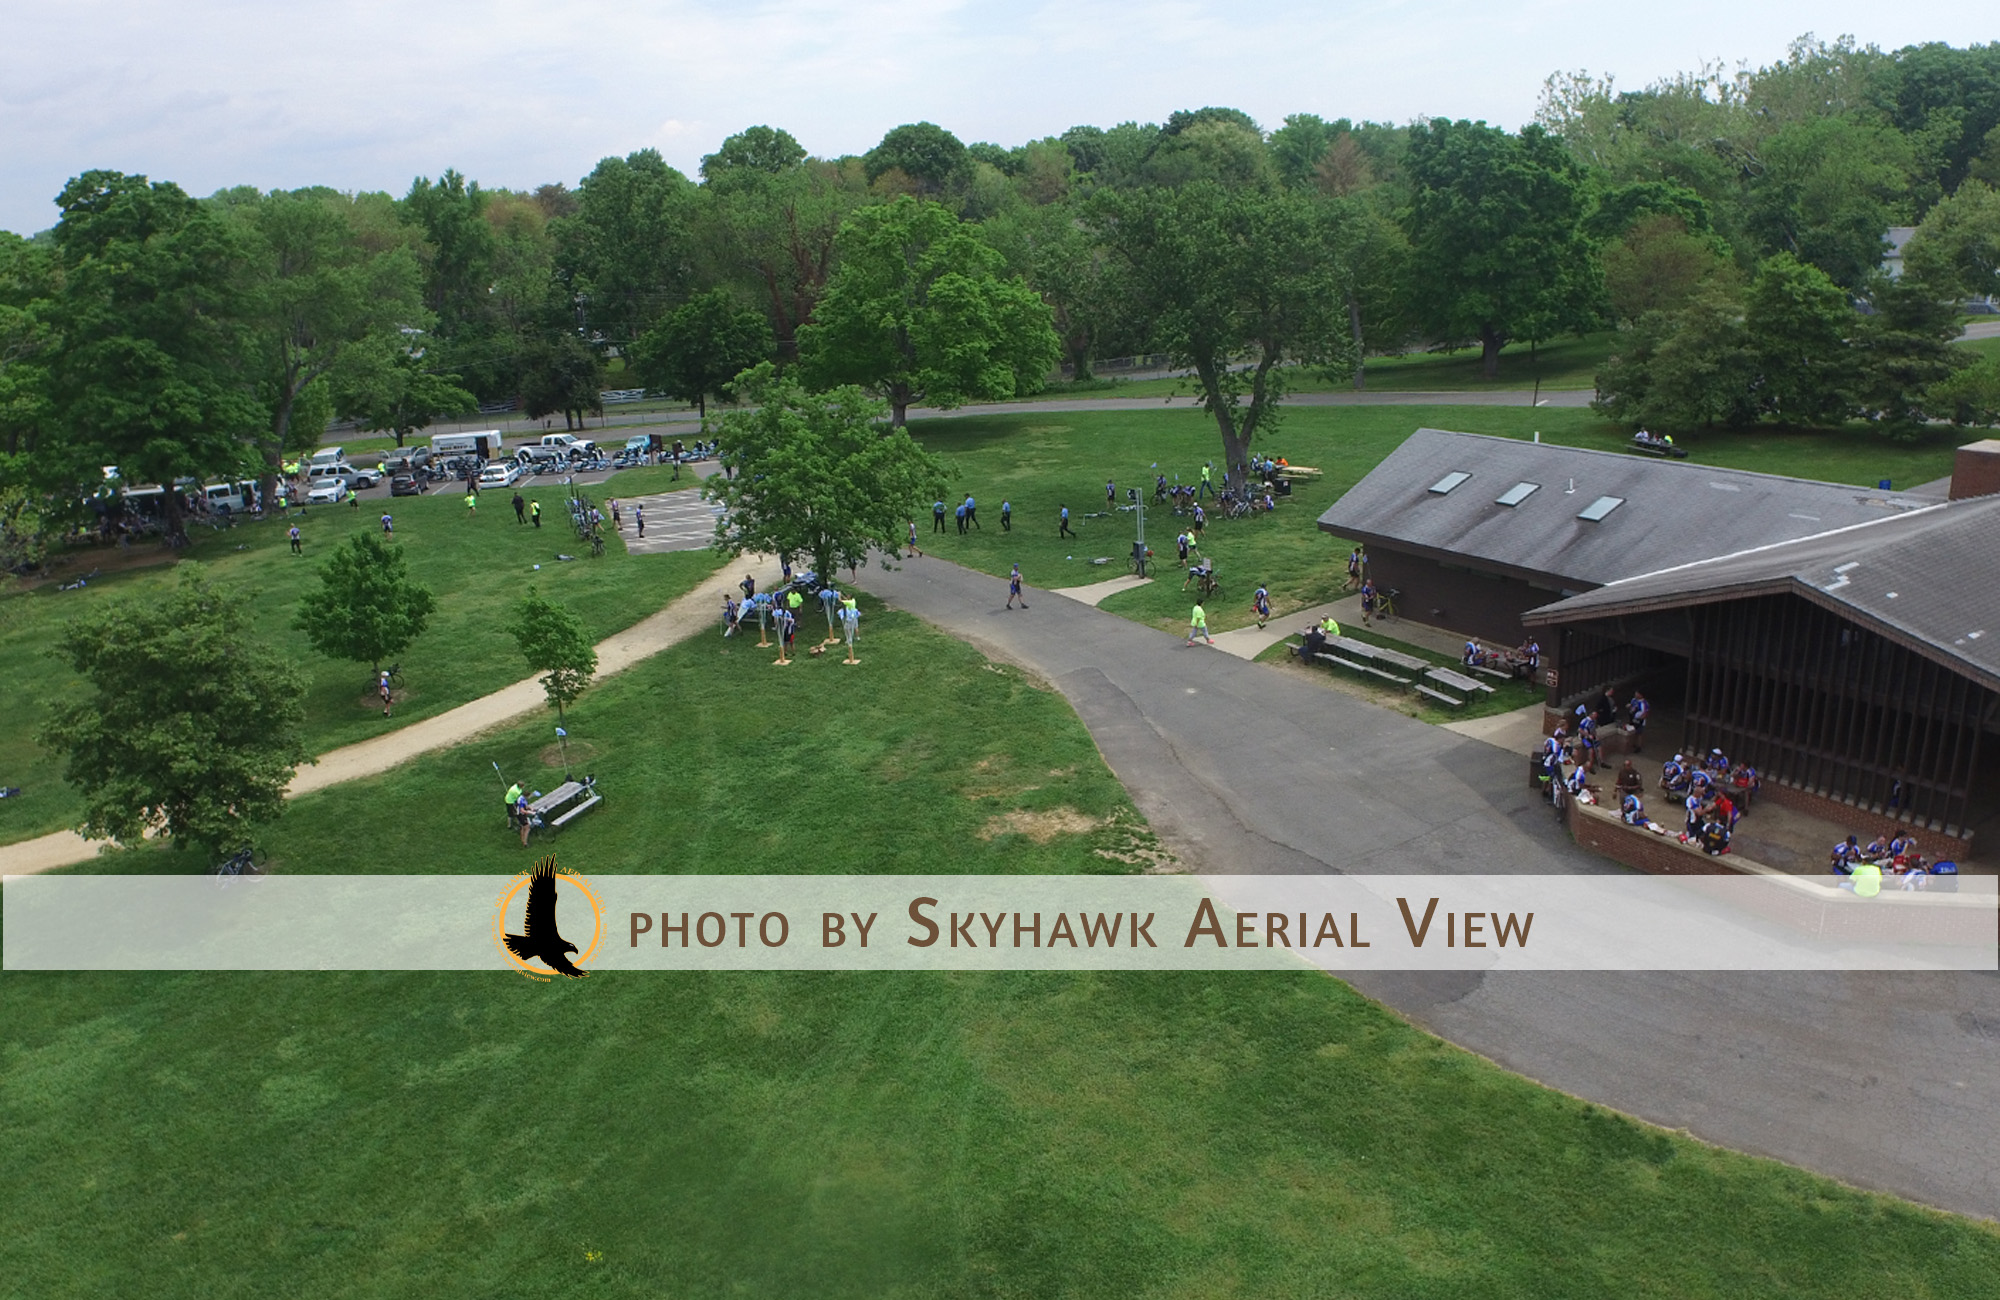 Special Event photography by Skyhawk Aerial View